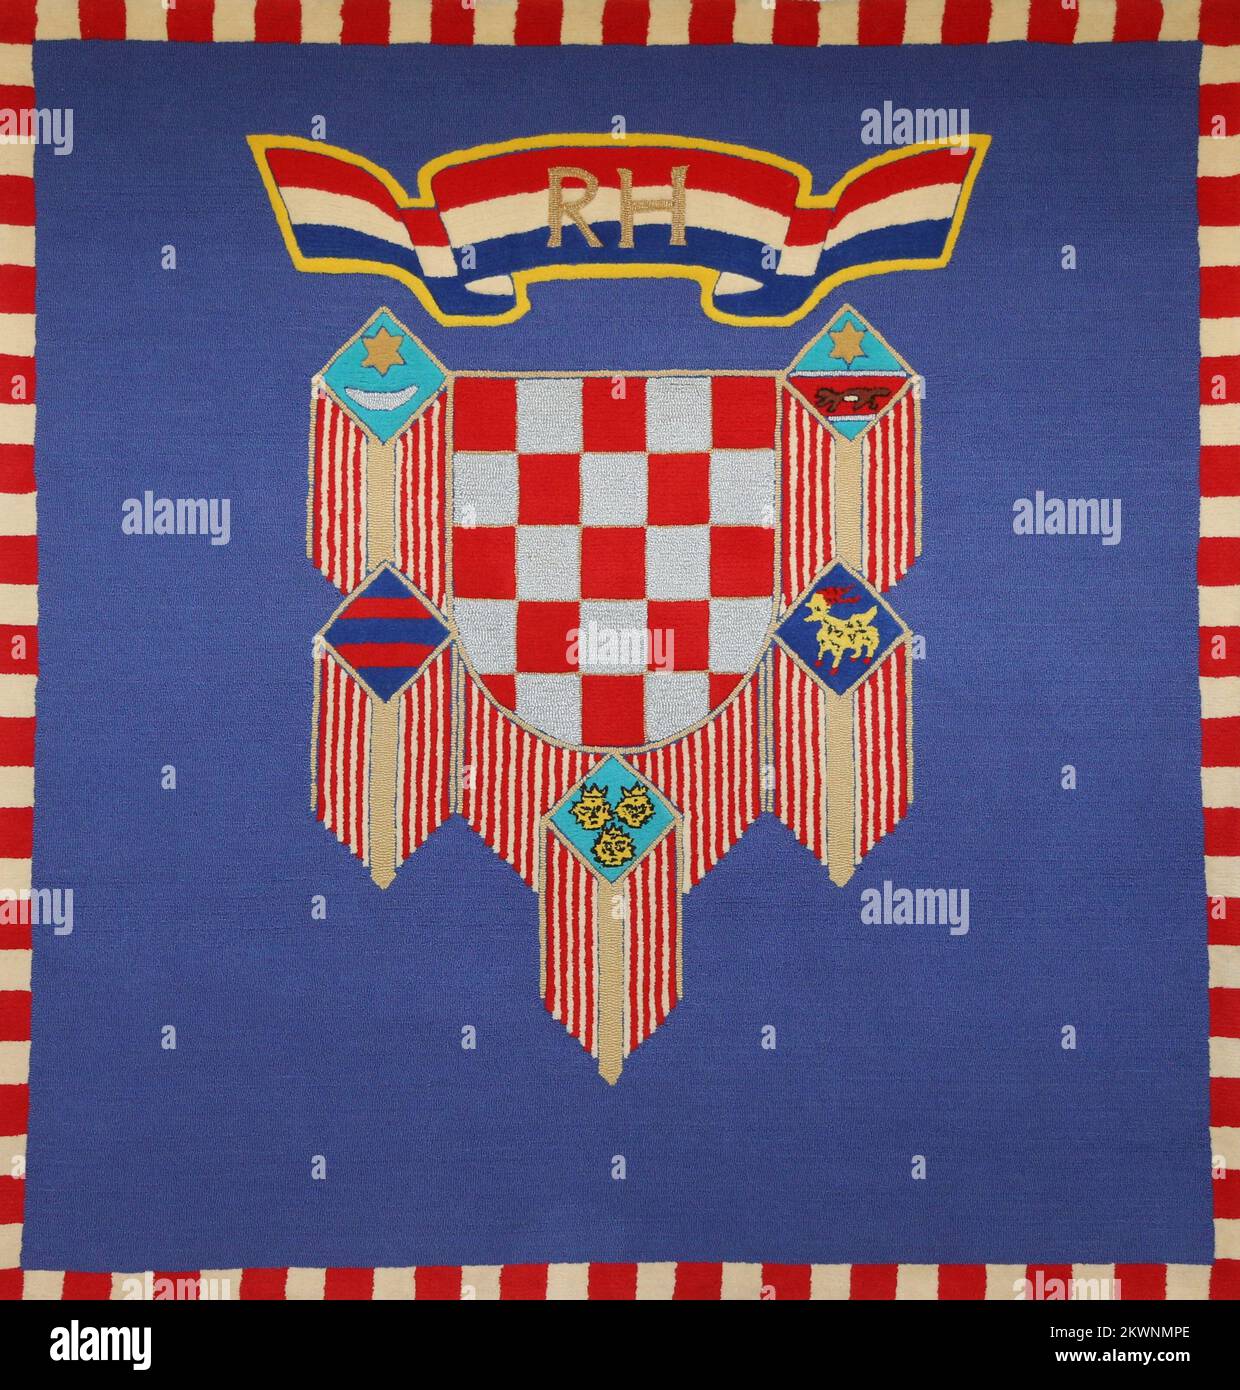 09.09.2013., Zagreb,Croatia  - Flag of the President of the Republic of Croatia is a square with the bordering edge consisting of a narrow stripe of red and white squares. The historical Croatian coat of arms containing 25 red and silver squares is situated in the middle of the flag on a blue base. The shield is decorated with a garland of medallions in which historic coats of arms of Croatian lands are arranged from left to right in the following order: the oldest known Croatian coat of arms and coats of arms of the Republic of Dubrovnik, Dalmatia, Istria, and Slavonia. Sheaves of parallel go Stock Photo